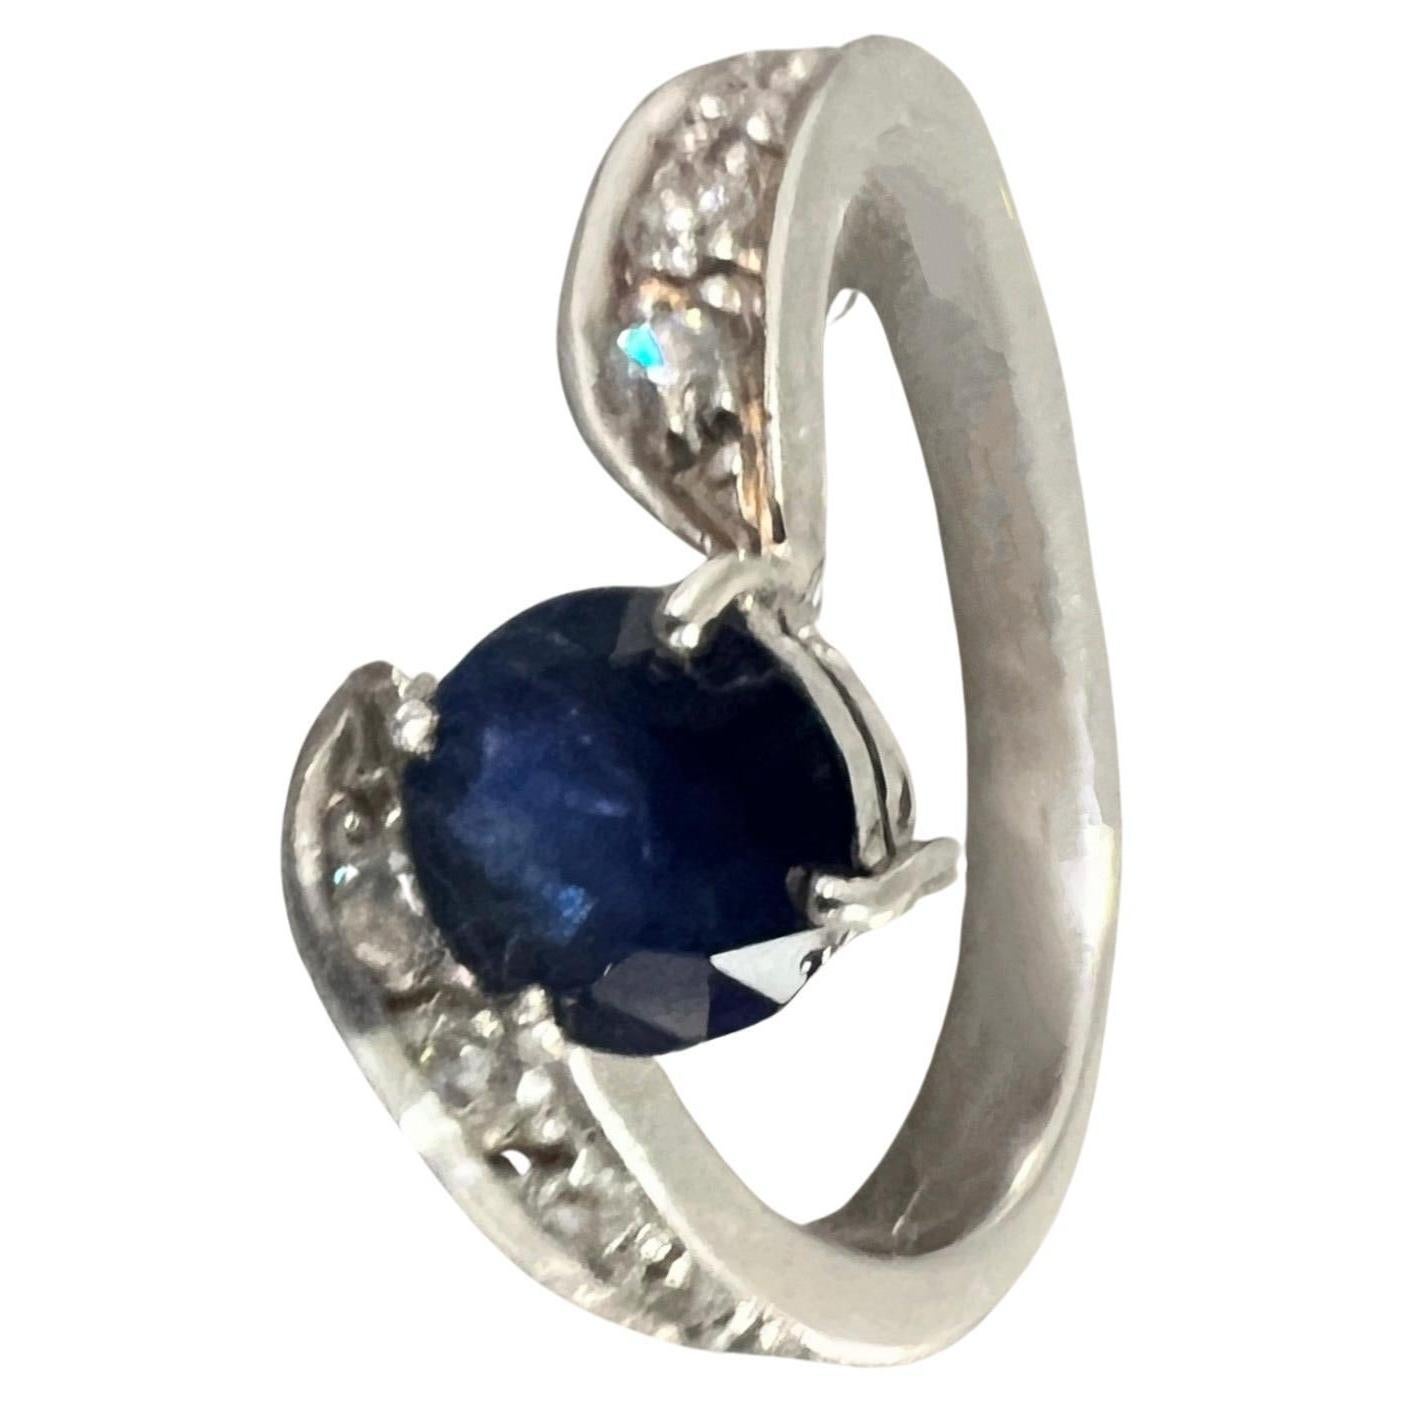 NO RESERVE 1ct BLUE AND WHITE SAPPHIRE Ring im Angebot 1